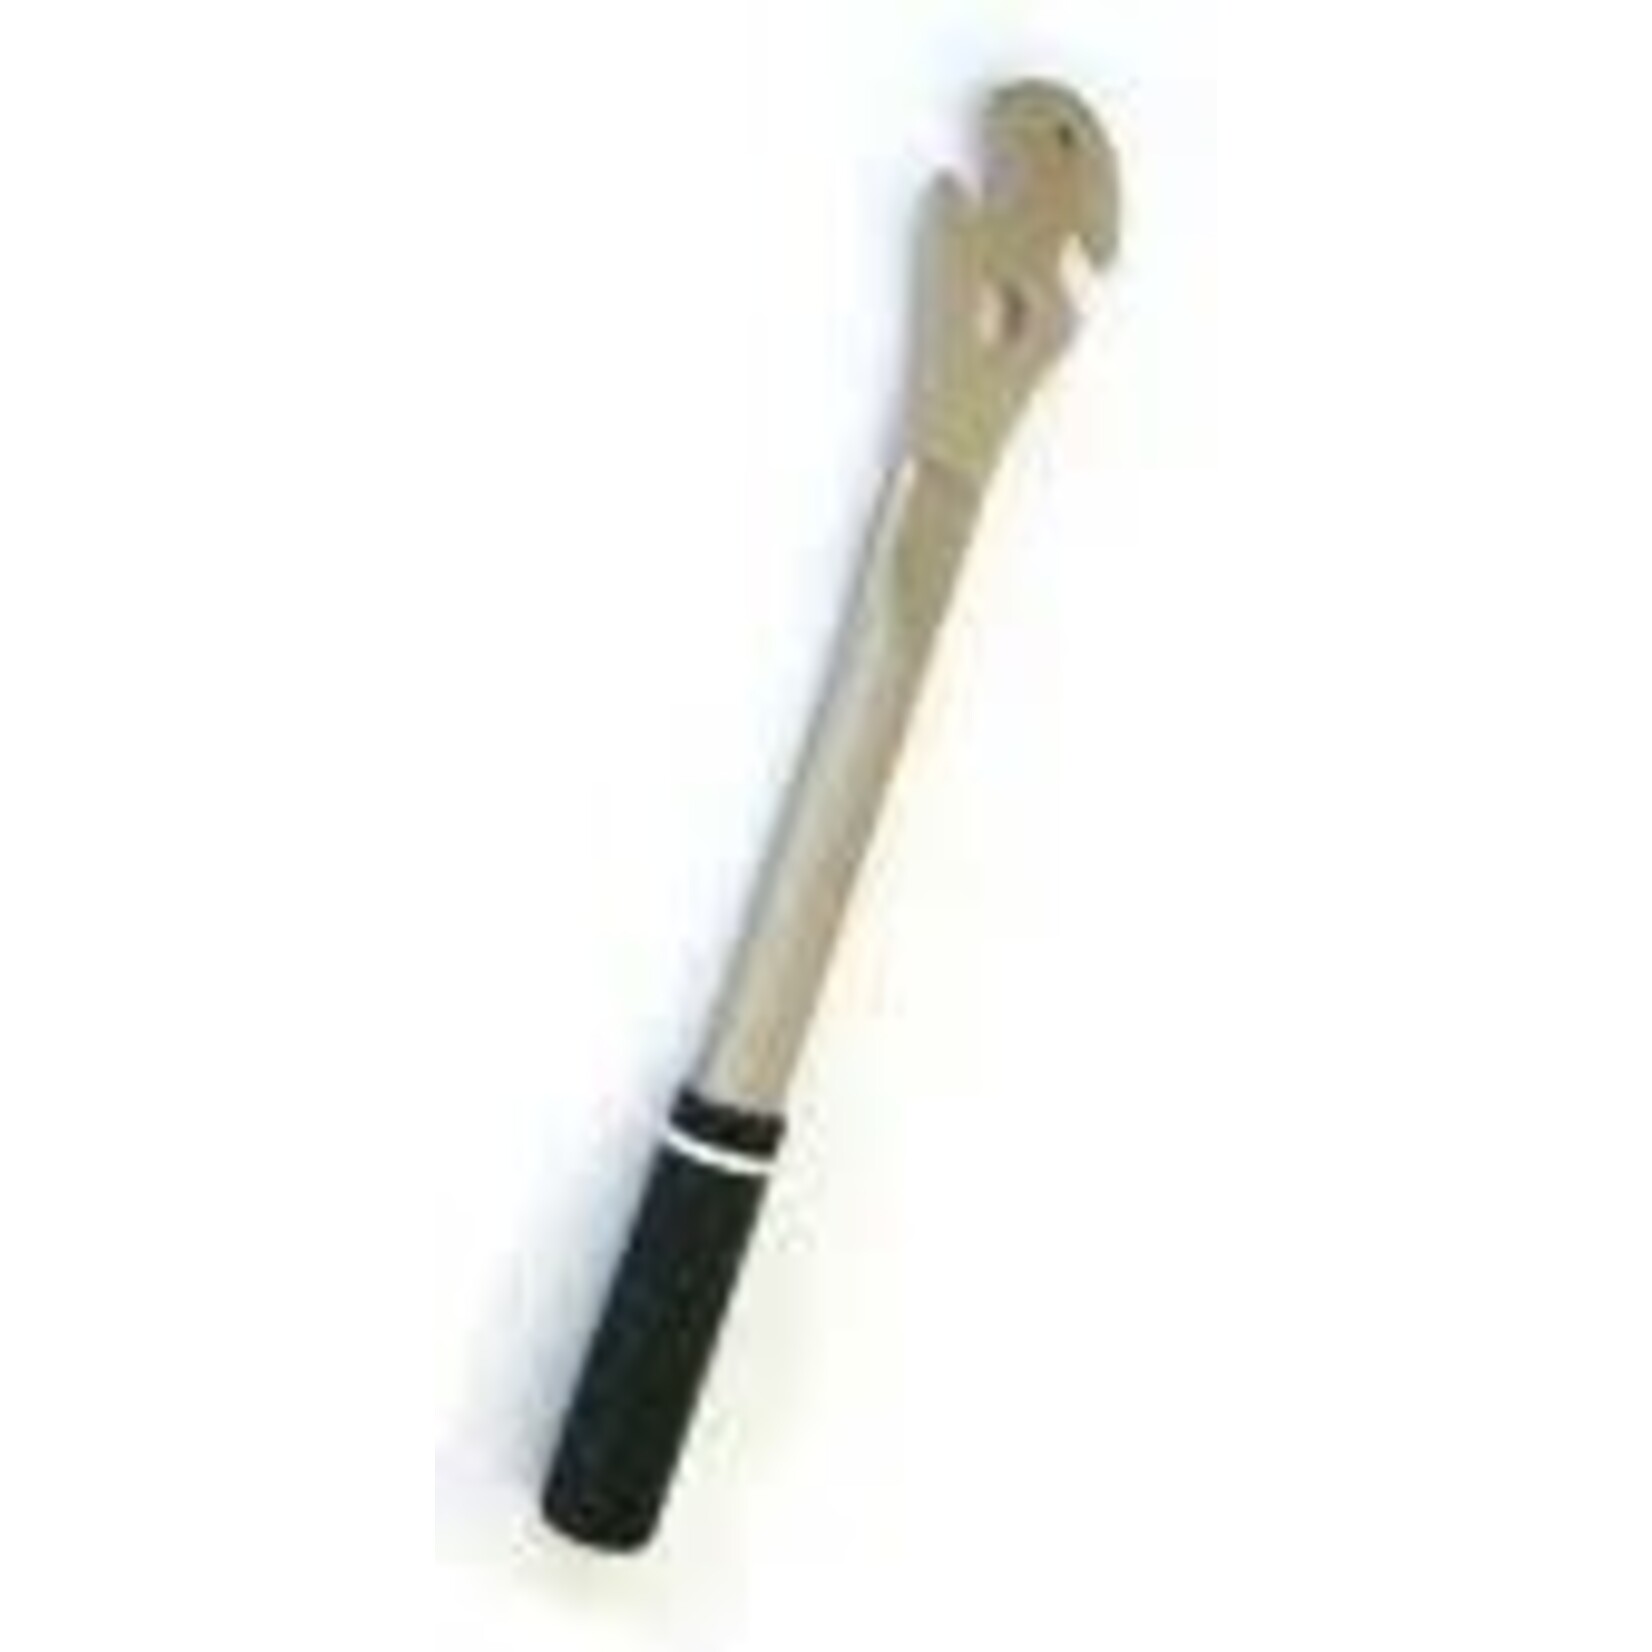 Incomex Trading Pty Ltd Pro-Series - Bike/Cycling Tool - Pedal Wrench Extra Long